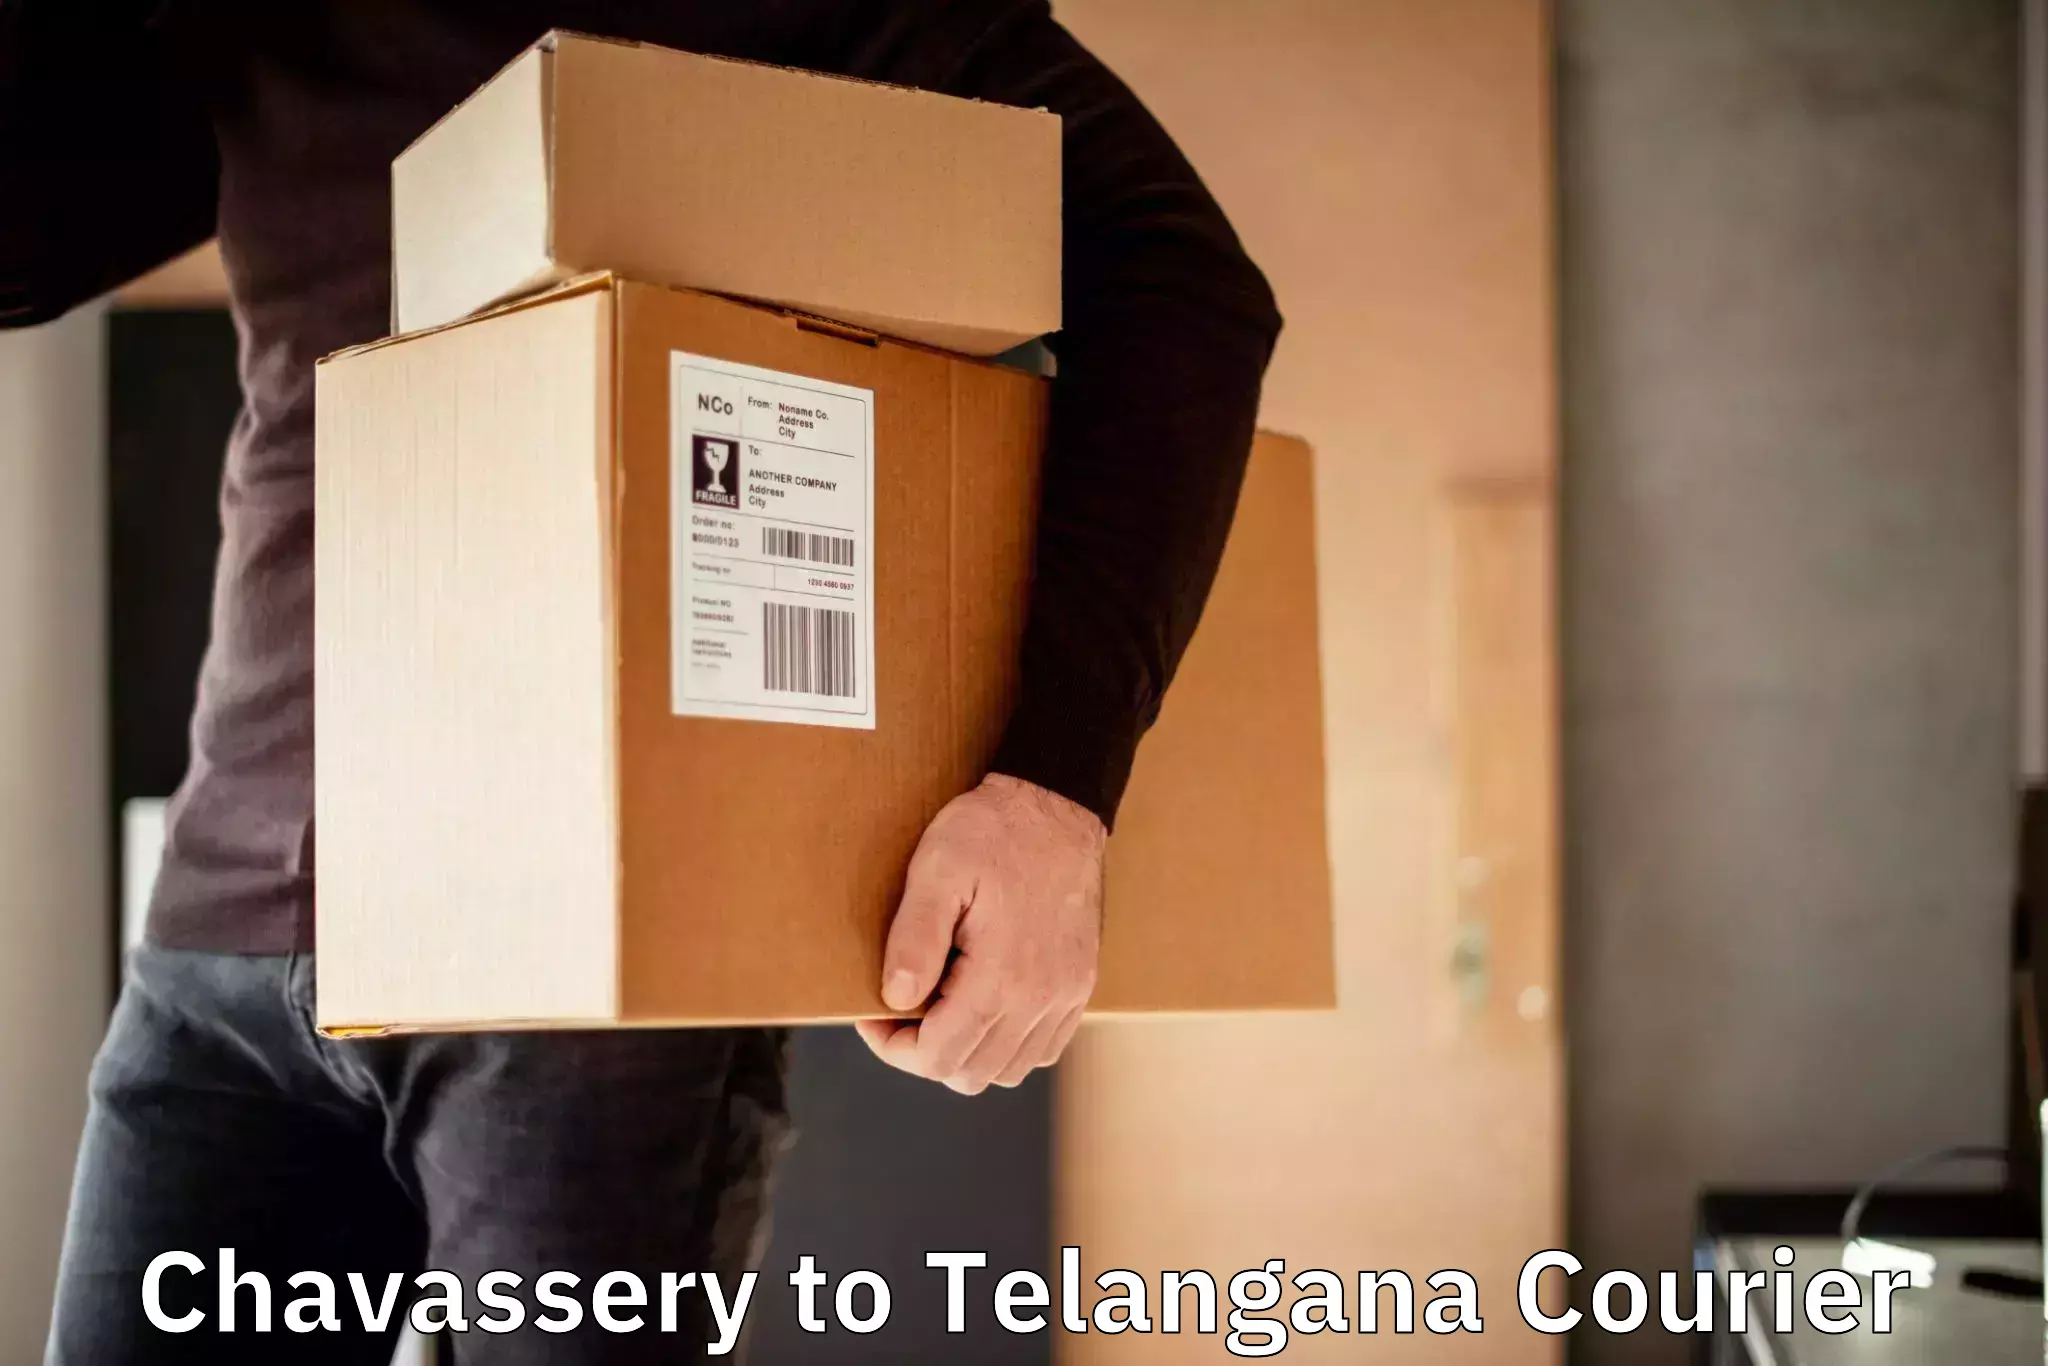 Courier service booking Chavassery to Nalgonda